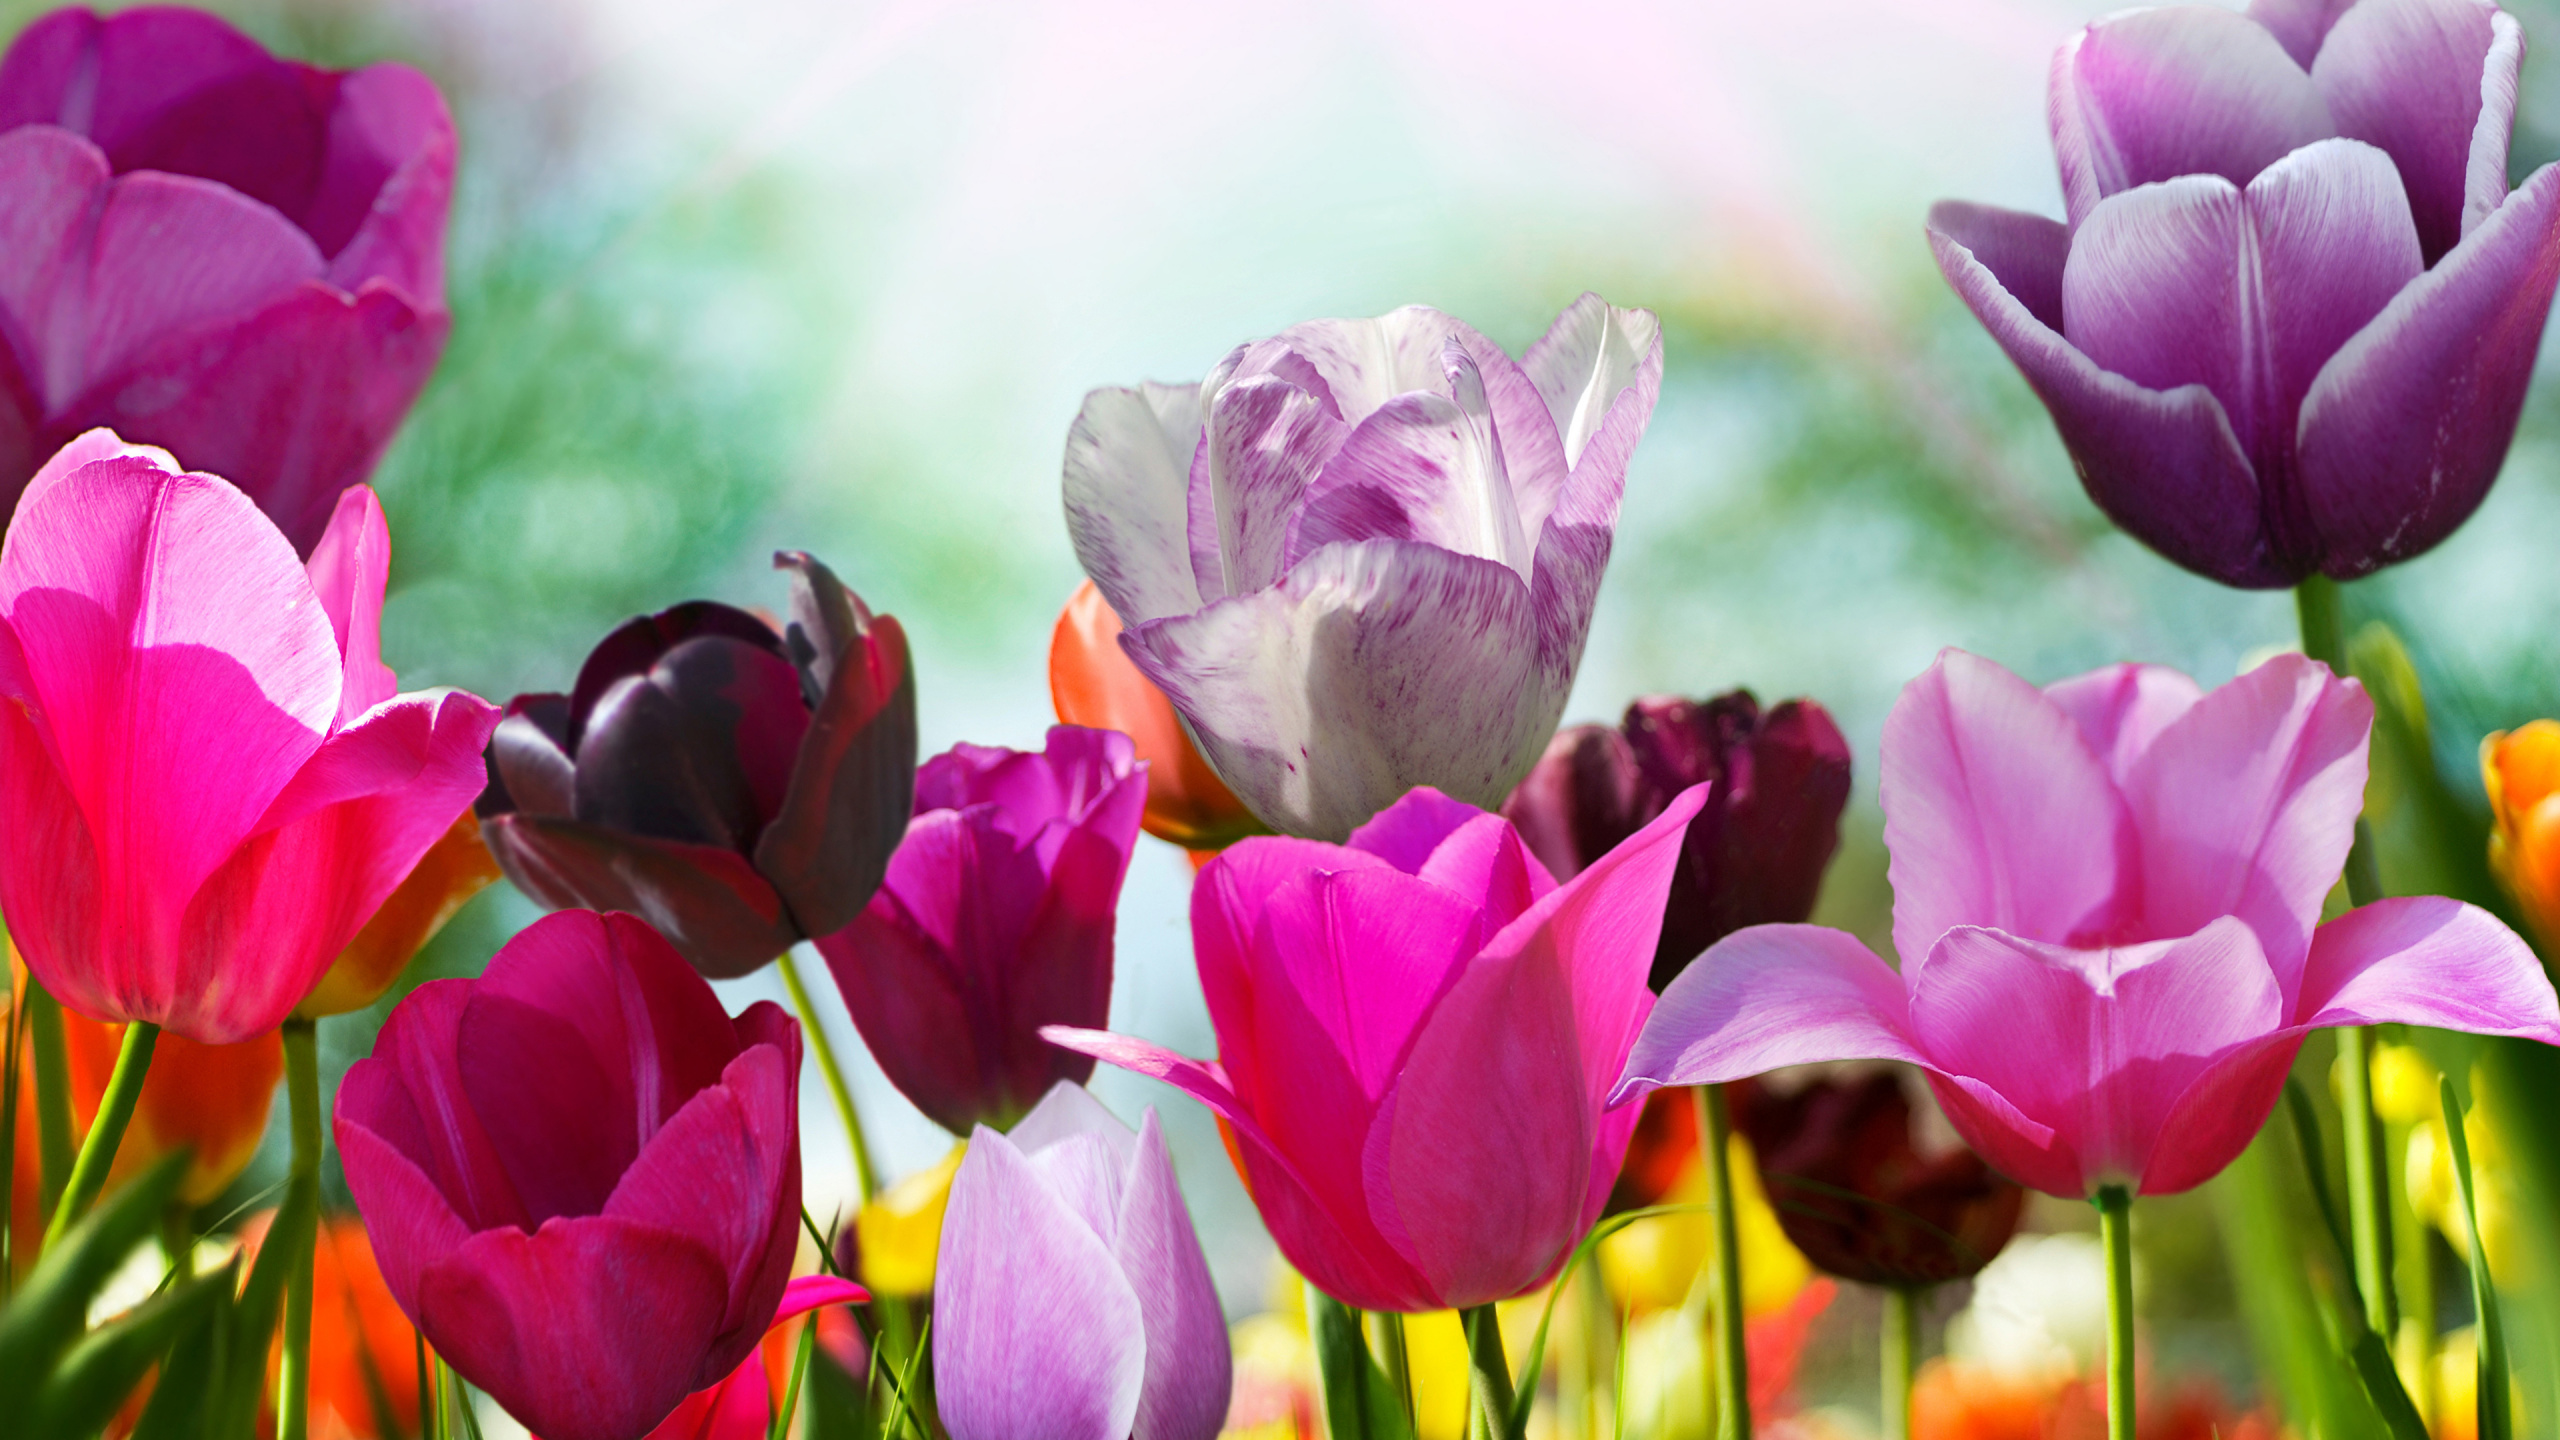 Purple and Pink Tulips in Bloom During Daytime. Wallpaper in 2560x1440 Resolution